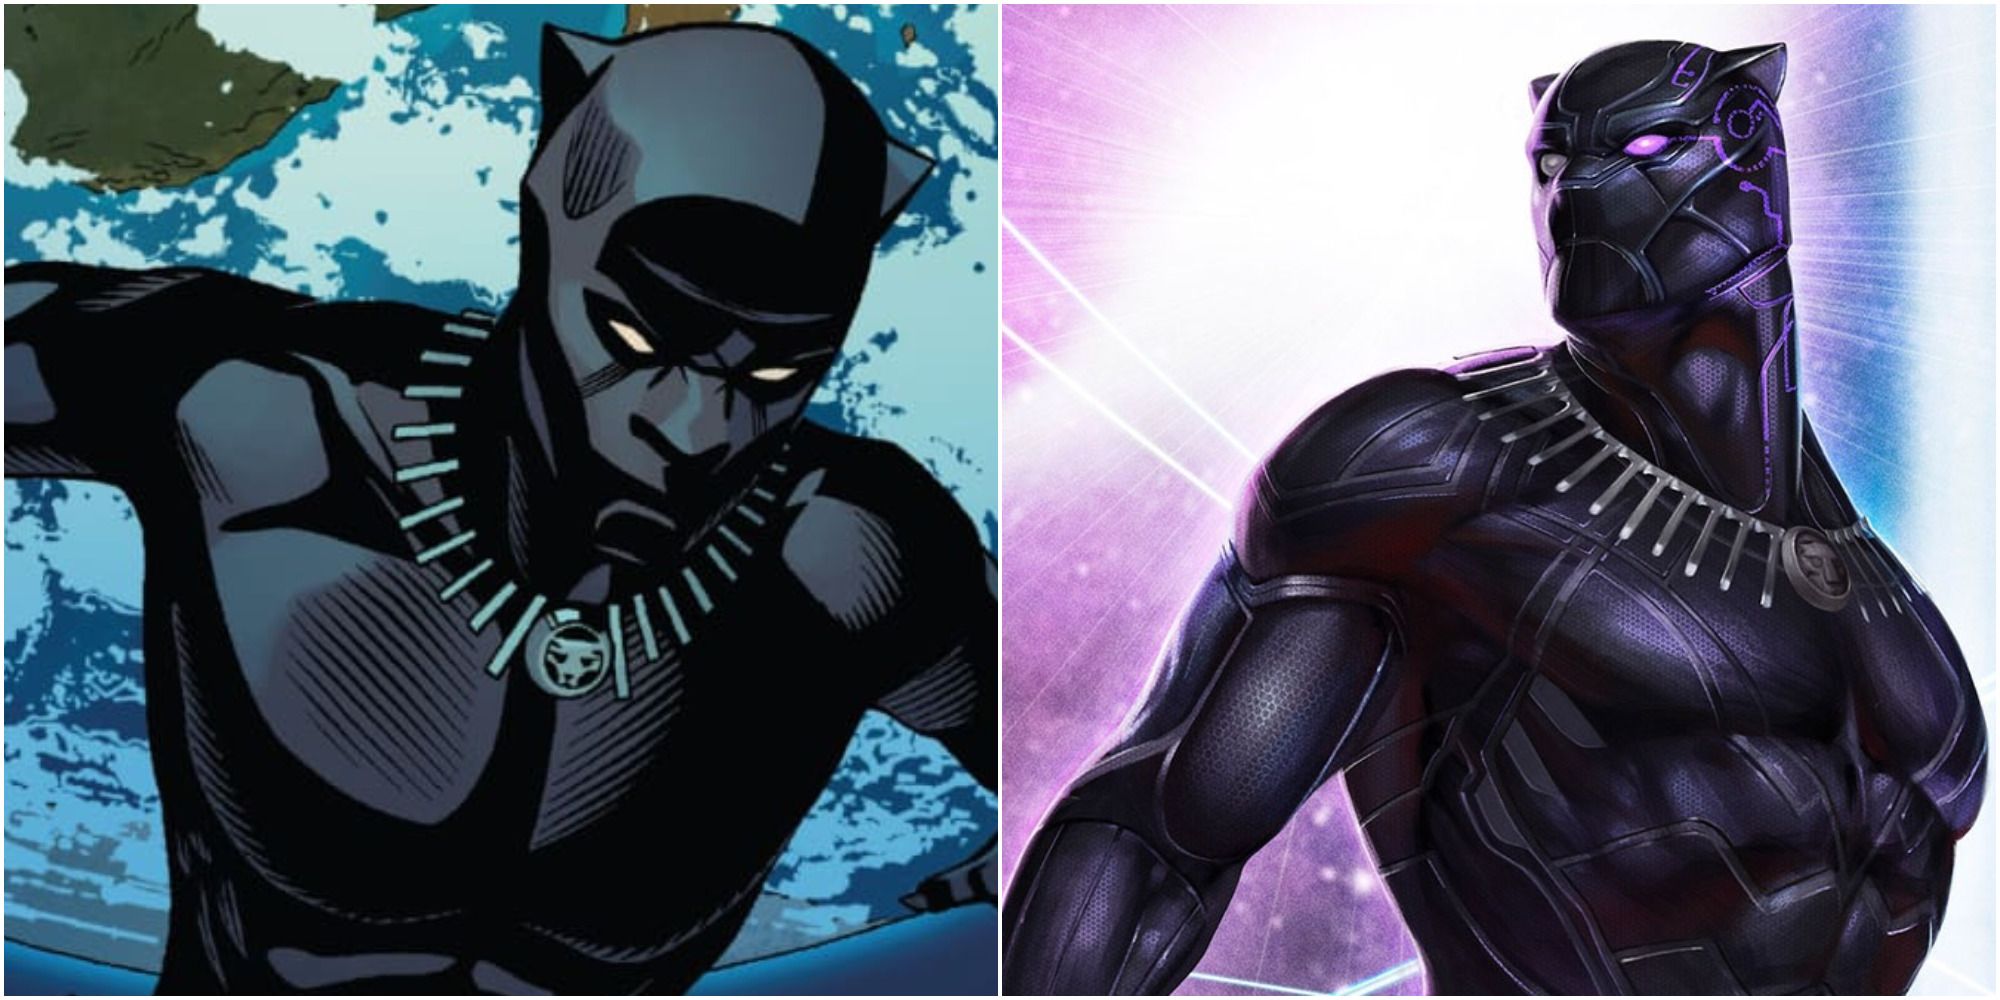 Black Panther (T'Challa) from the comics in space illustrations